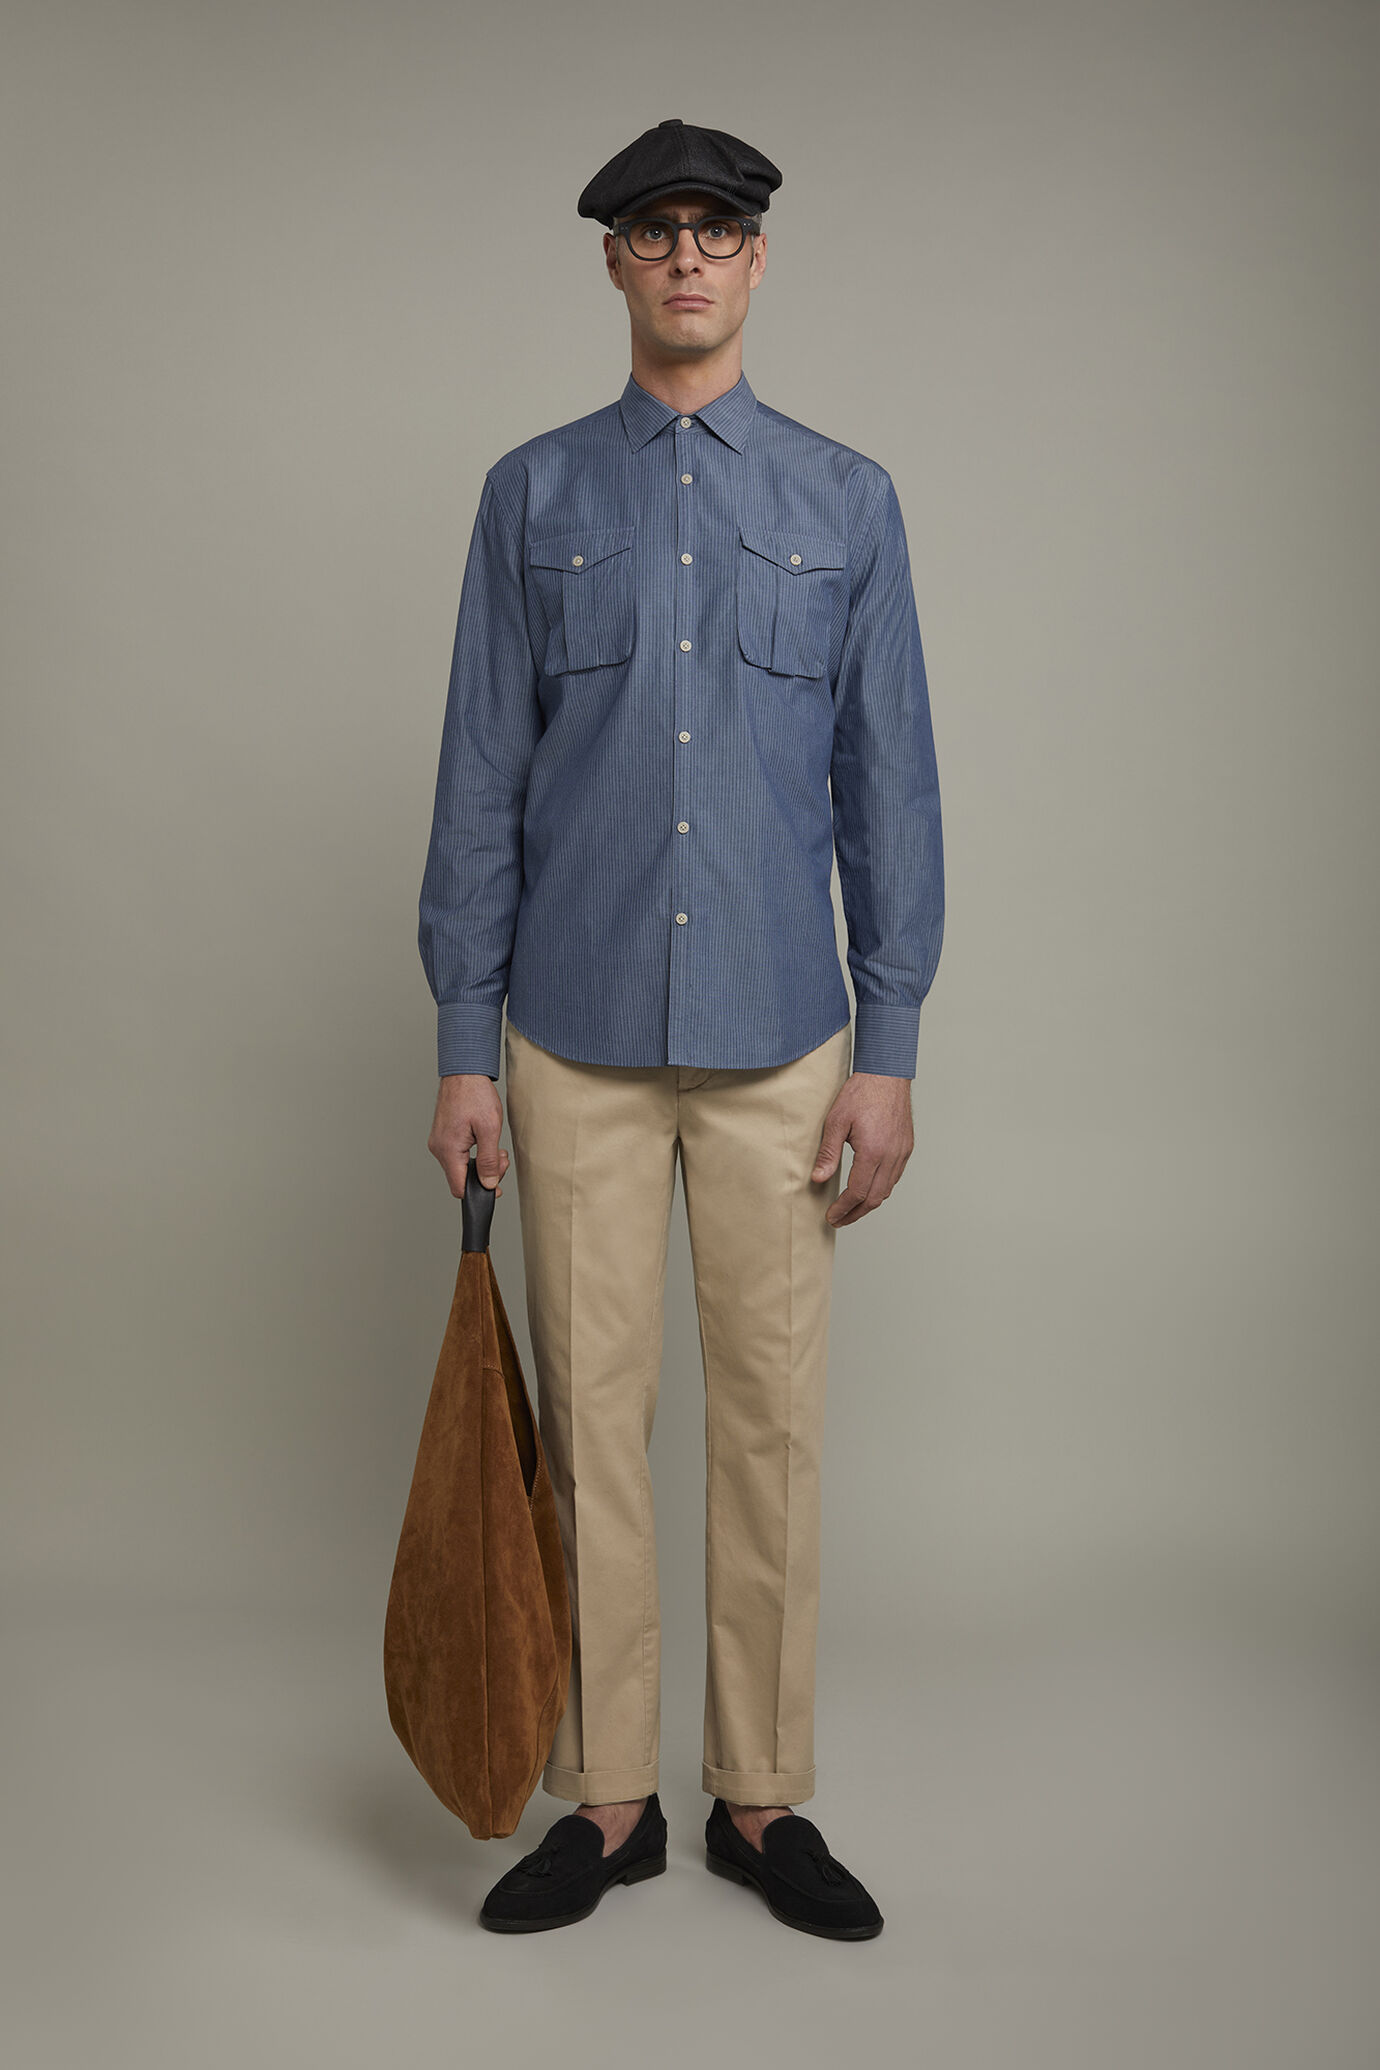 Men’s casual shirt with classic collar 100% cotton pinstriped fabric in denim comfort fit